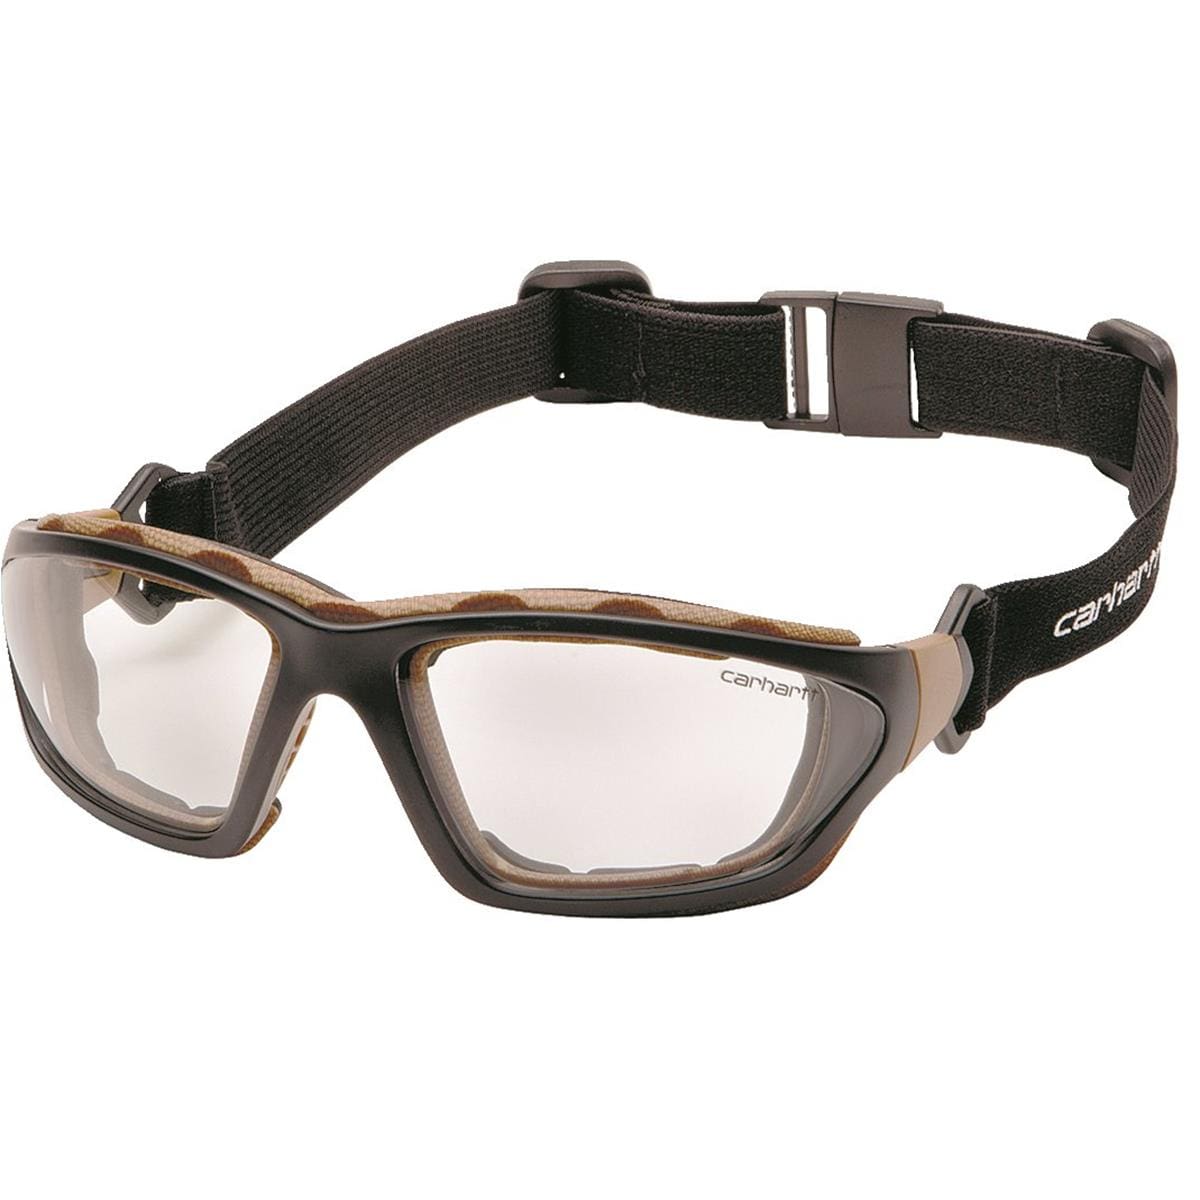 Carhartt Carthage™ Sealed Safety Glasses/Goggles | Gempler's